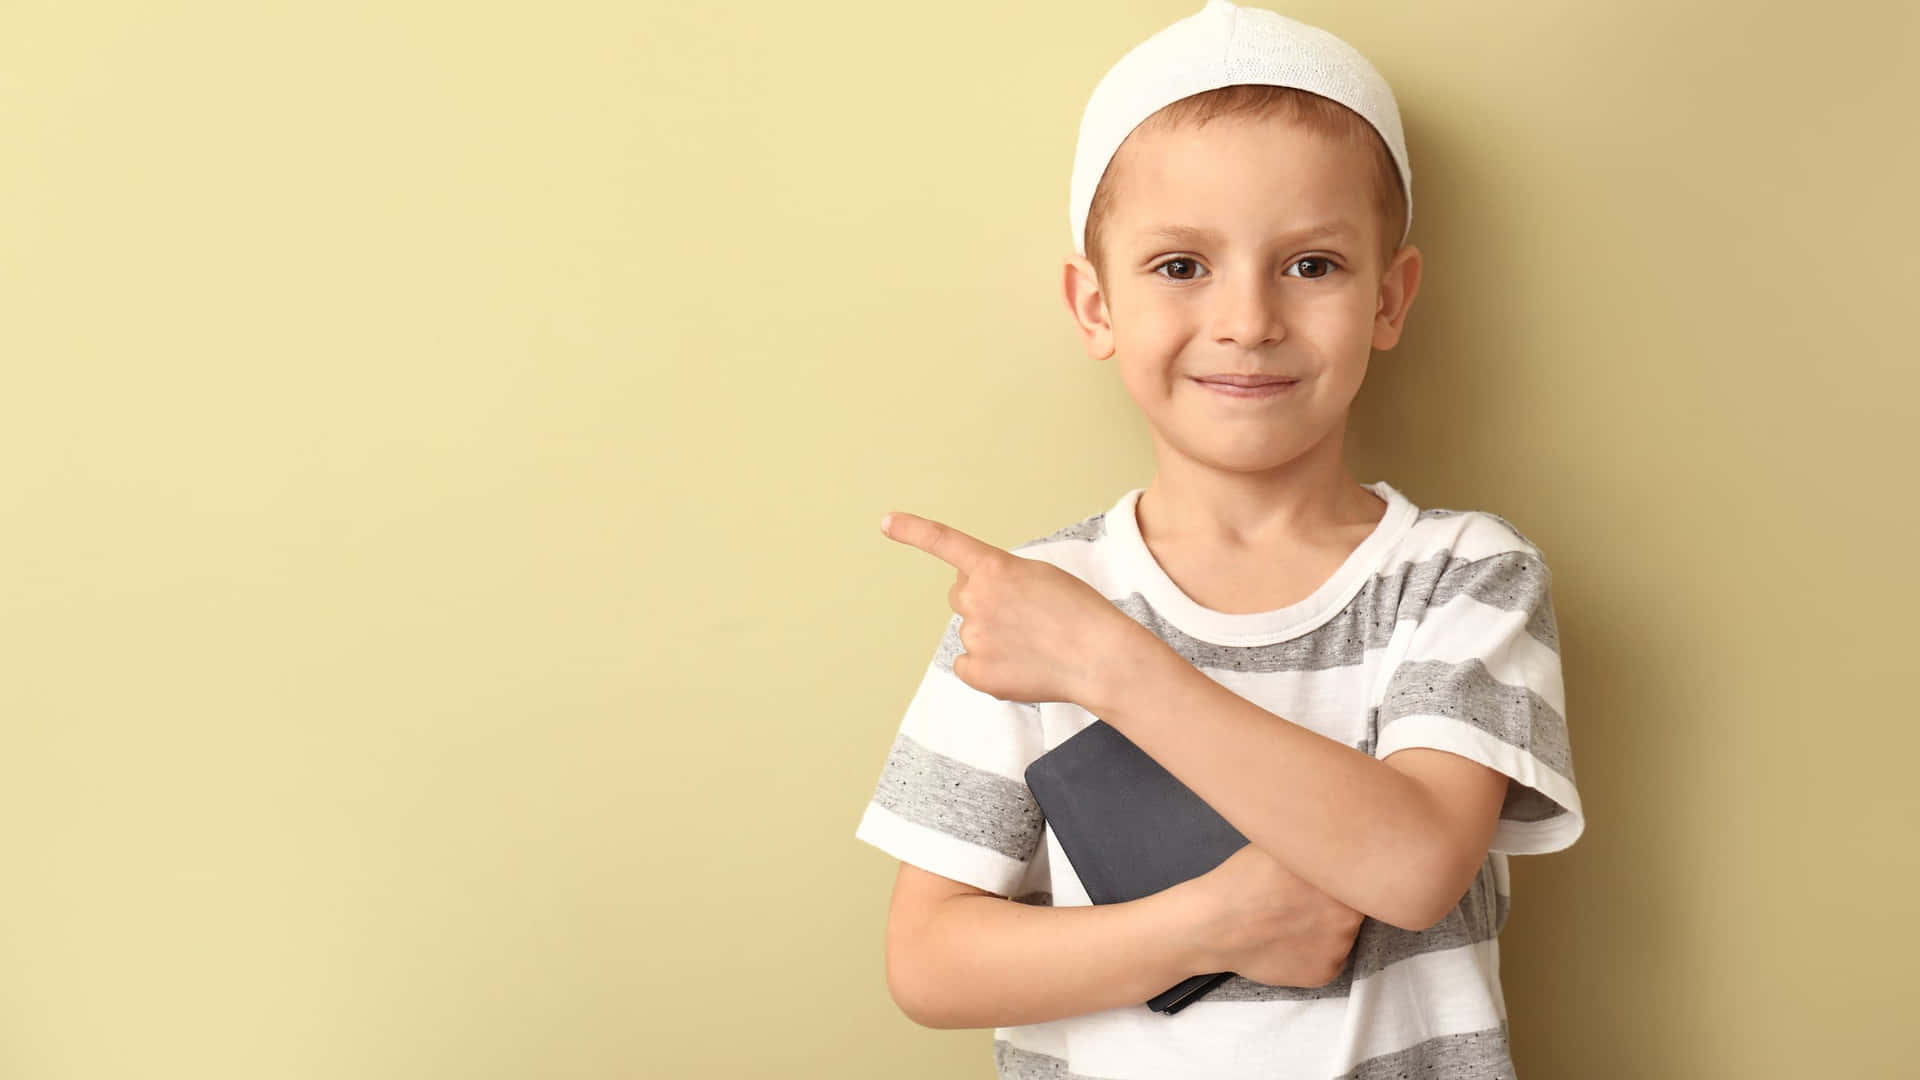 Muslim Boy Pointing The Other Side Wallpaper